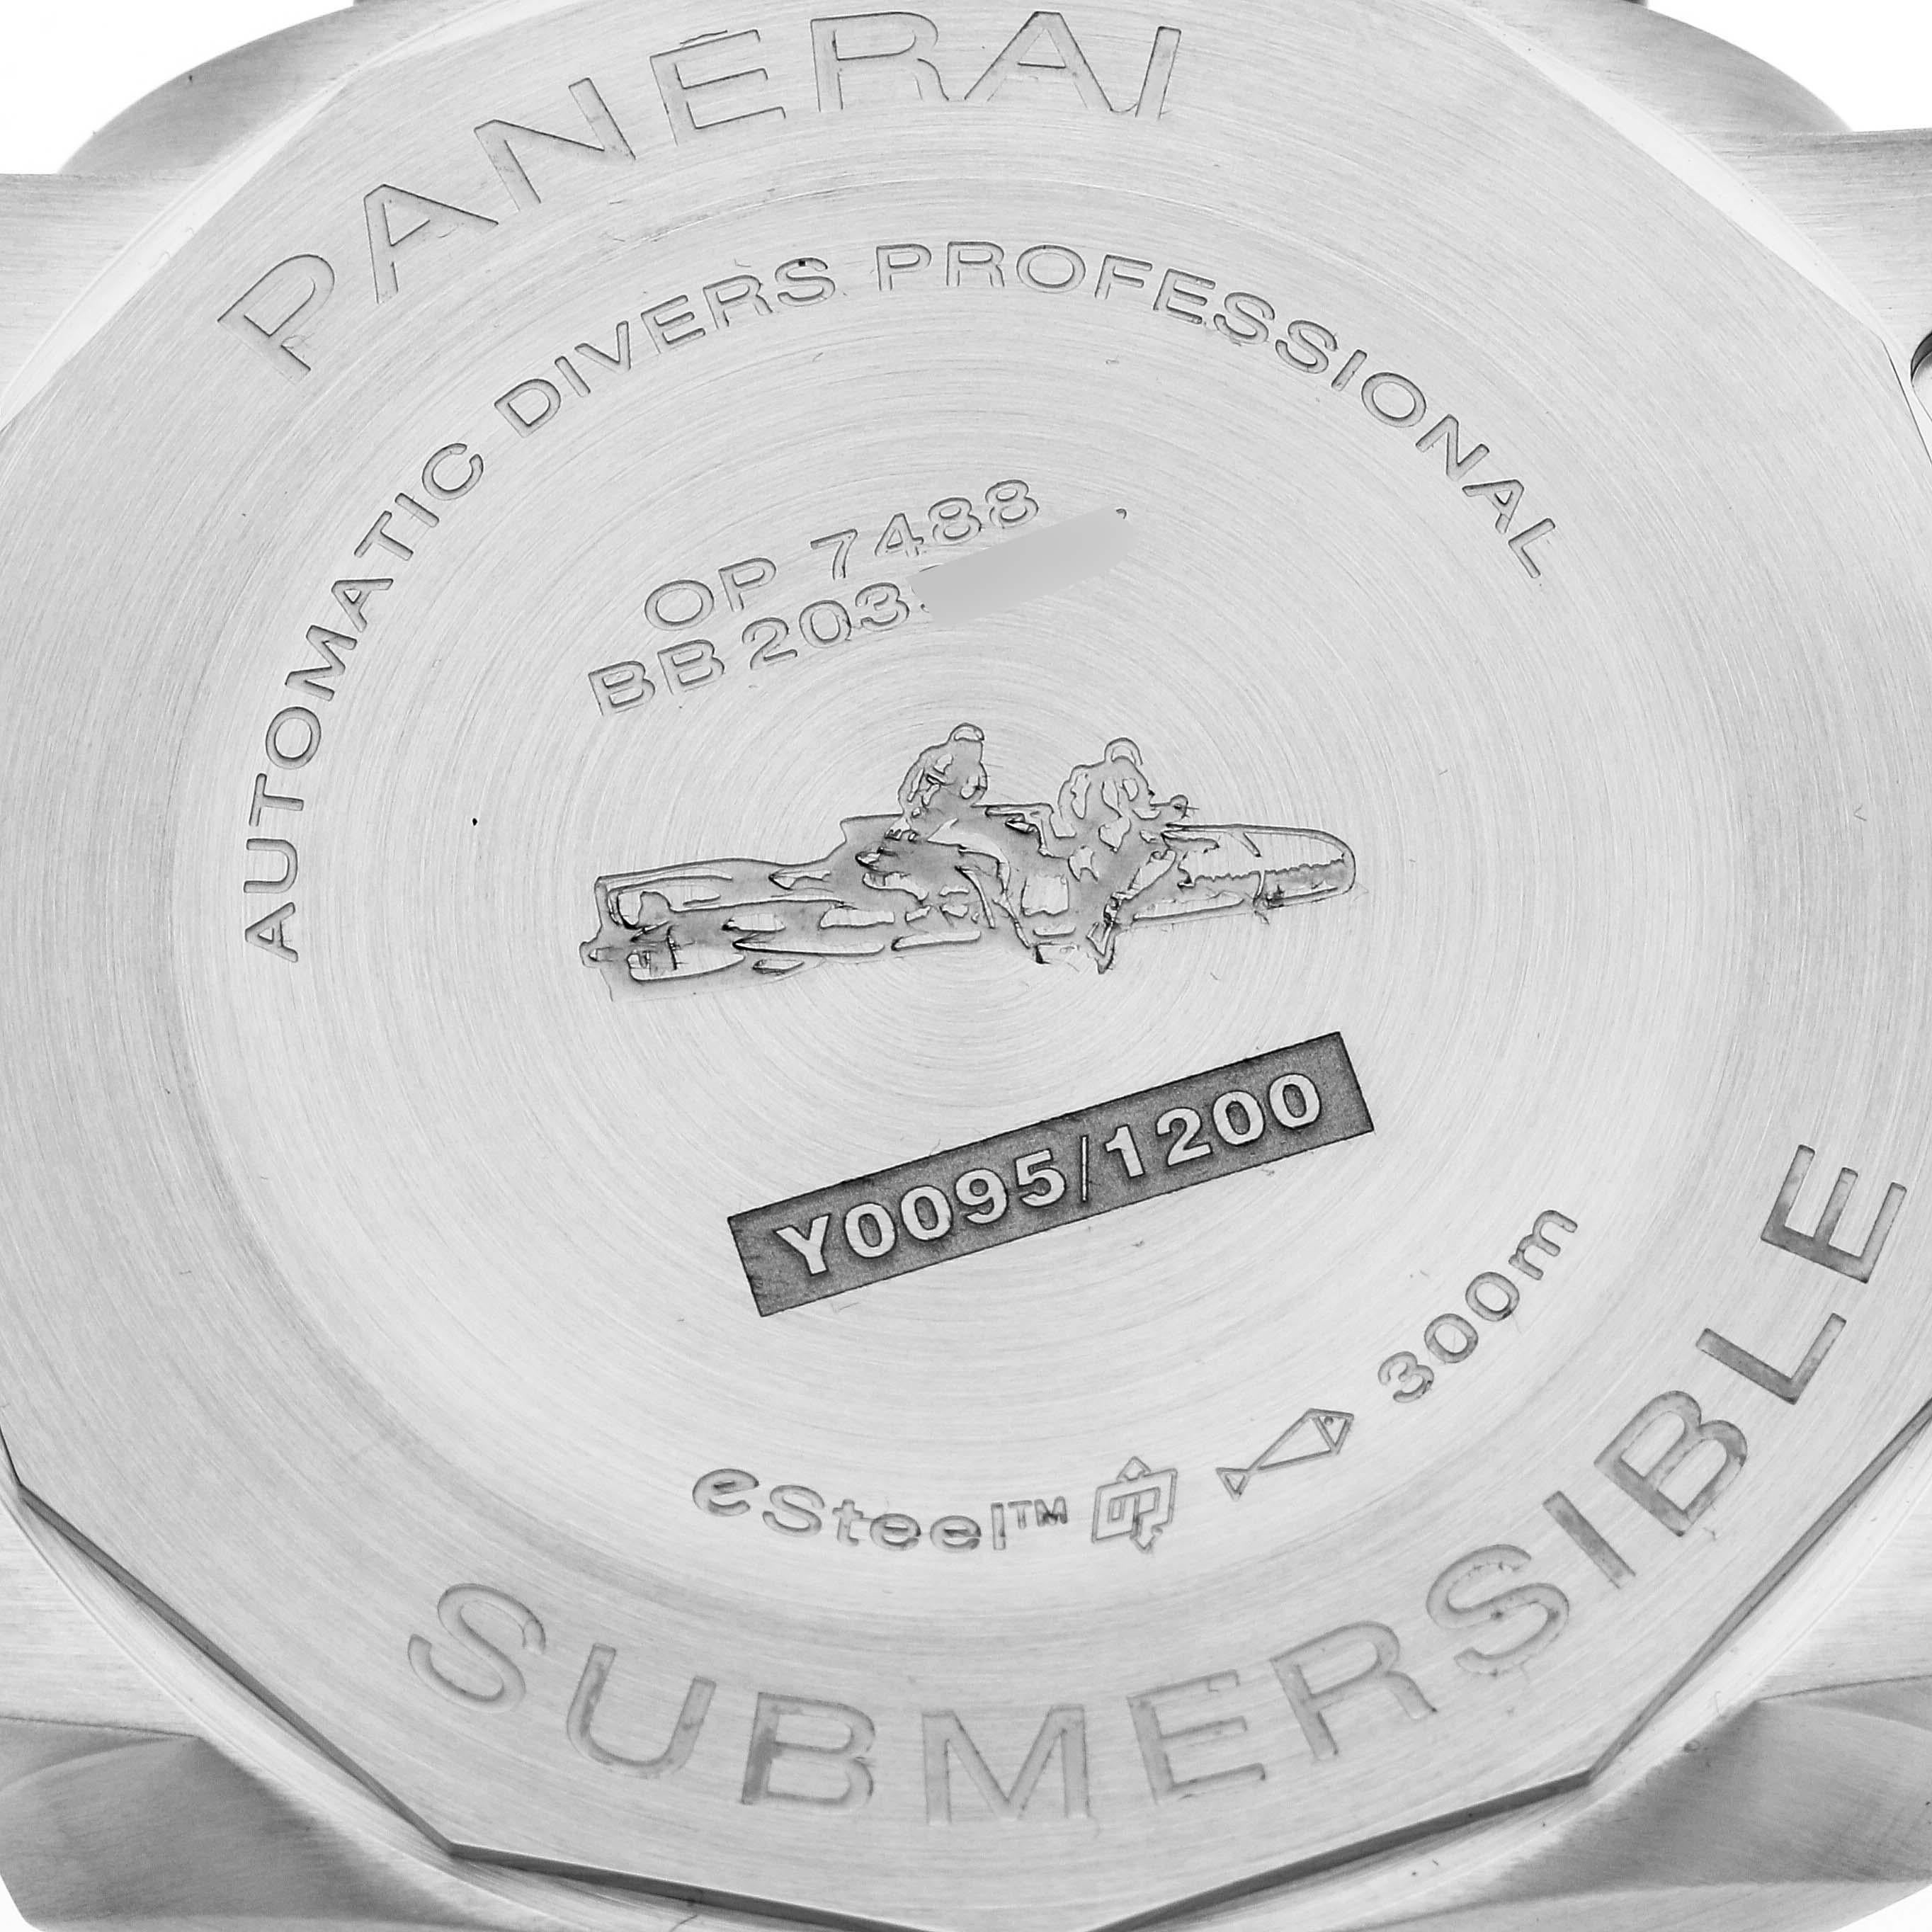 Panerai Submersible QuarantaQuattro Verde Smeraldo Steel Mens Watch PAM01287 Unworn. Automatic self-winding movement. Stainless steel cushion case, 44.0 mm in diameter. Panerai patented crown protector. Unidirectional rotating brushed stainless